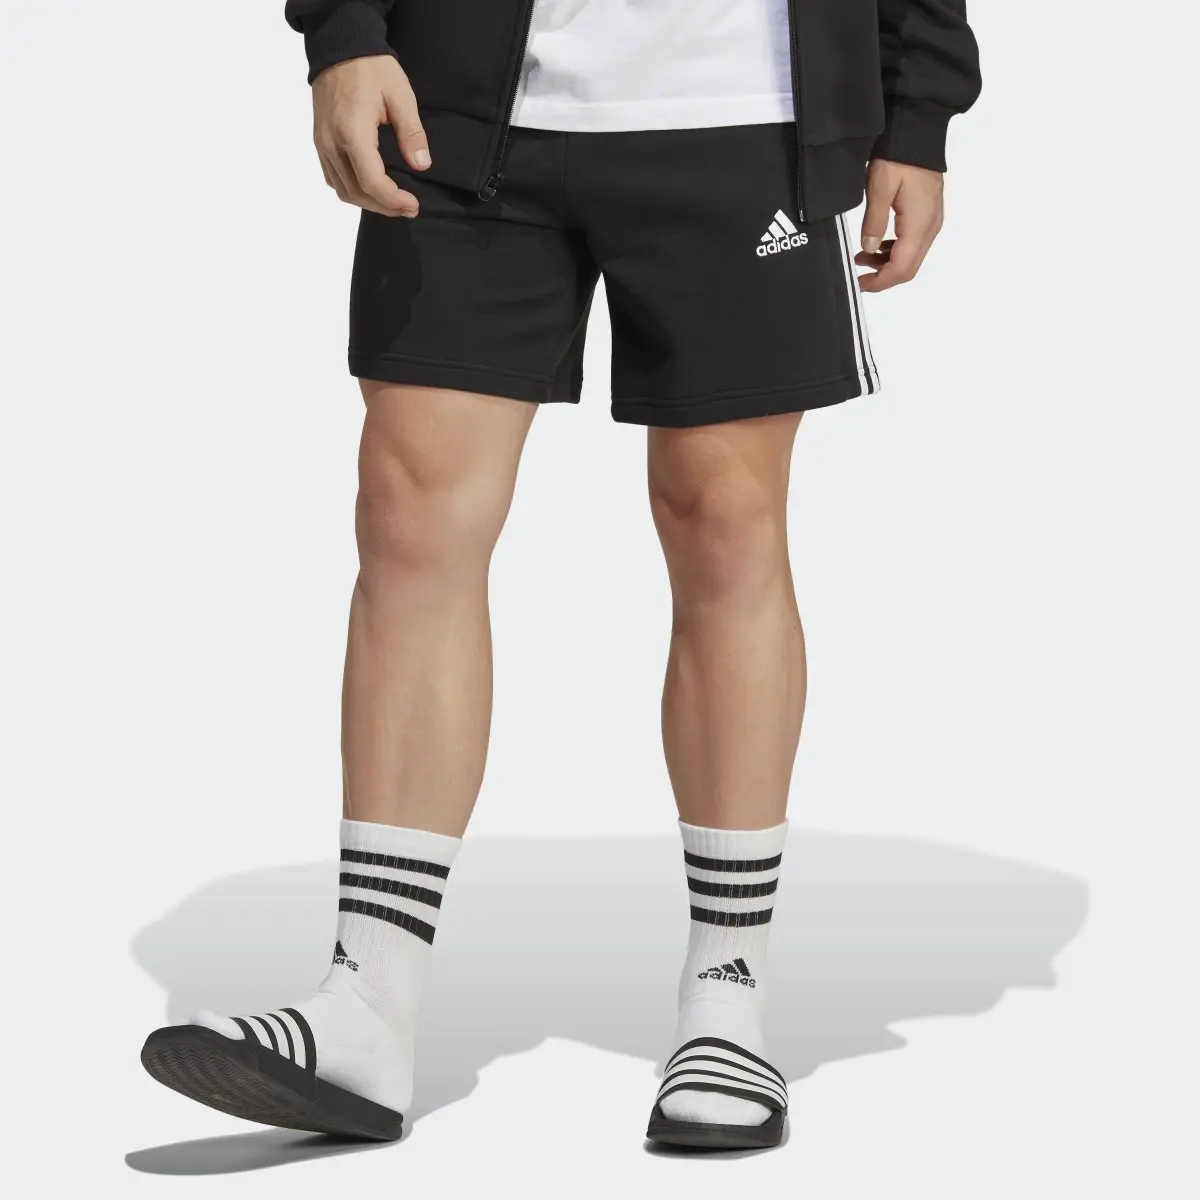 Adidas Essentials French Terry 3-Stripes Şort. 1